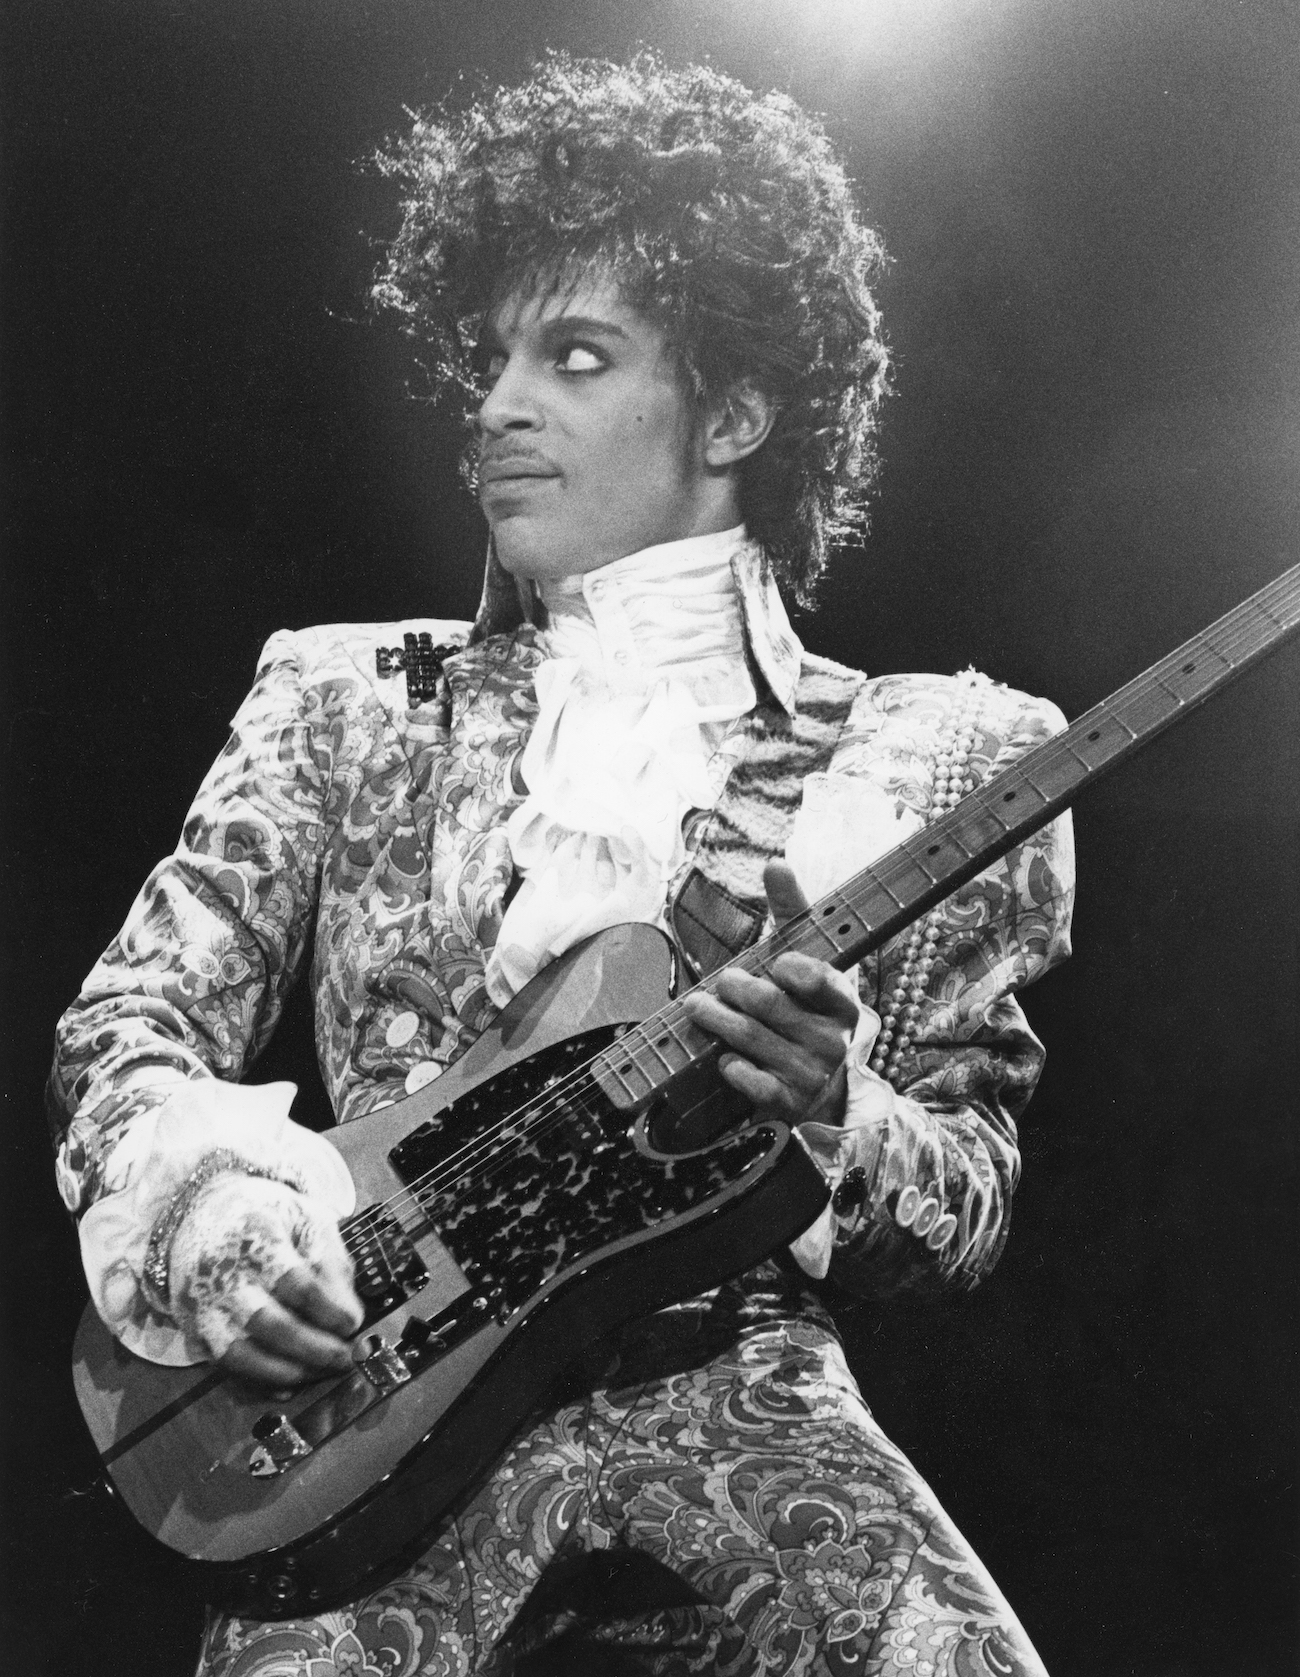 American singer, songwriter and musician Prince, circa 1985.